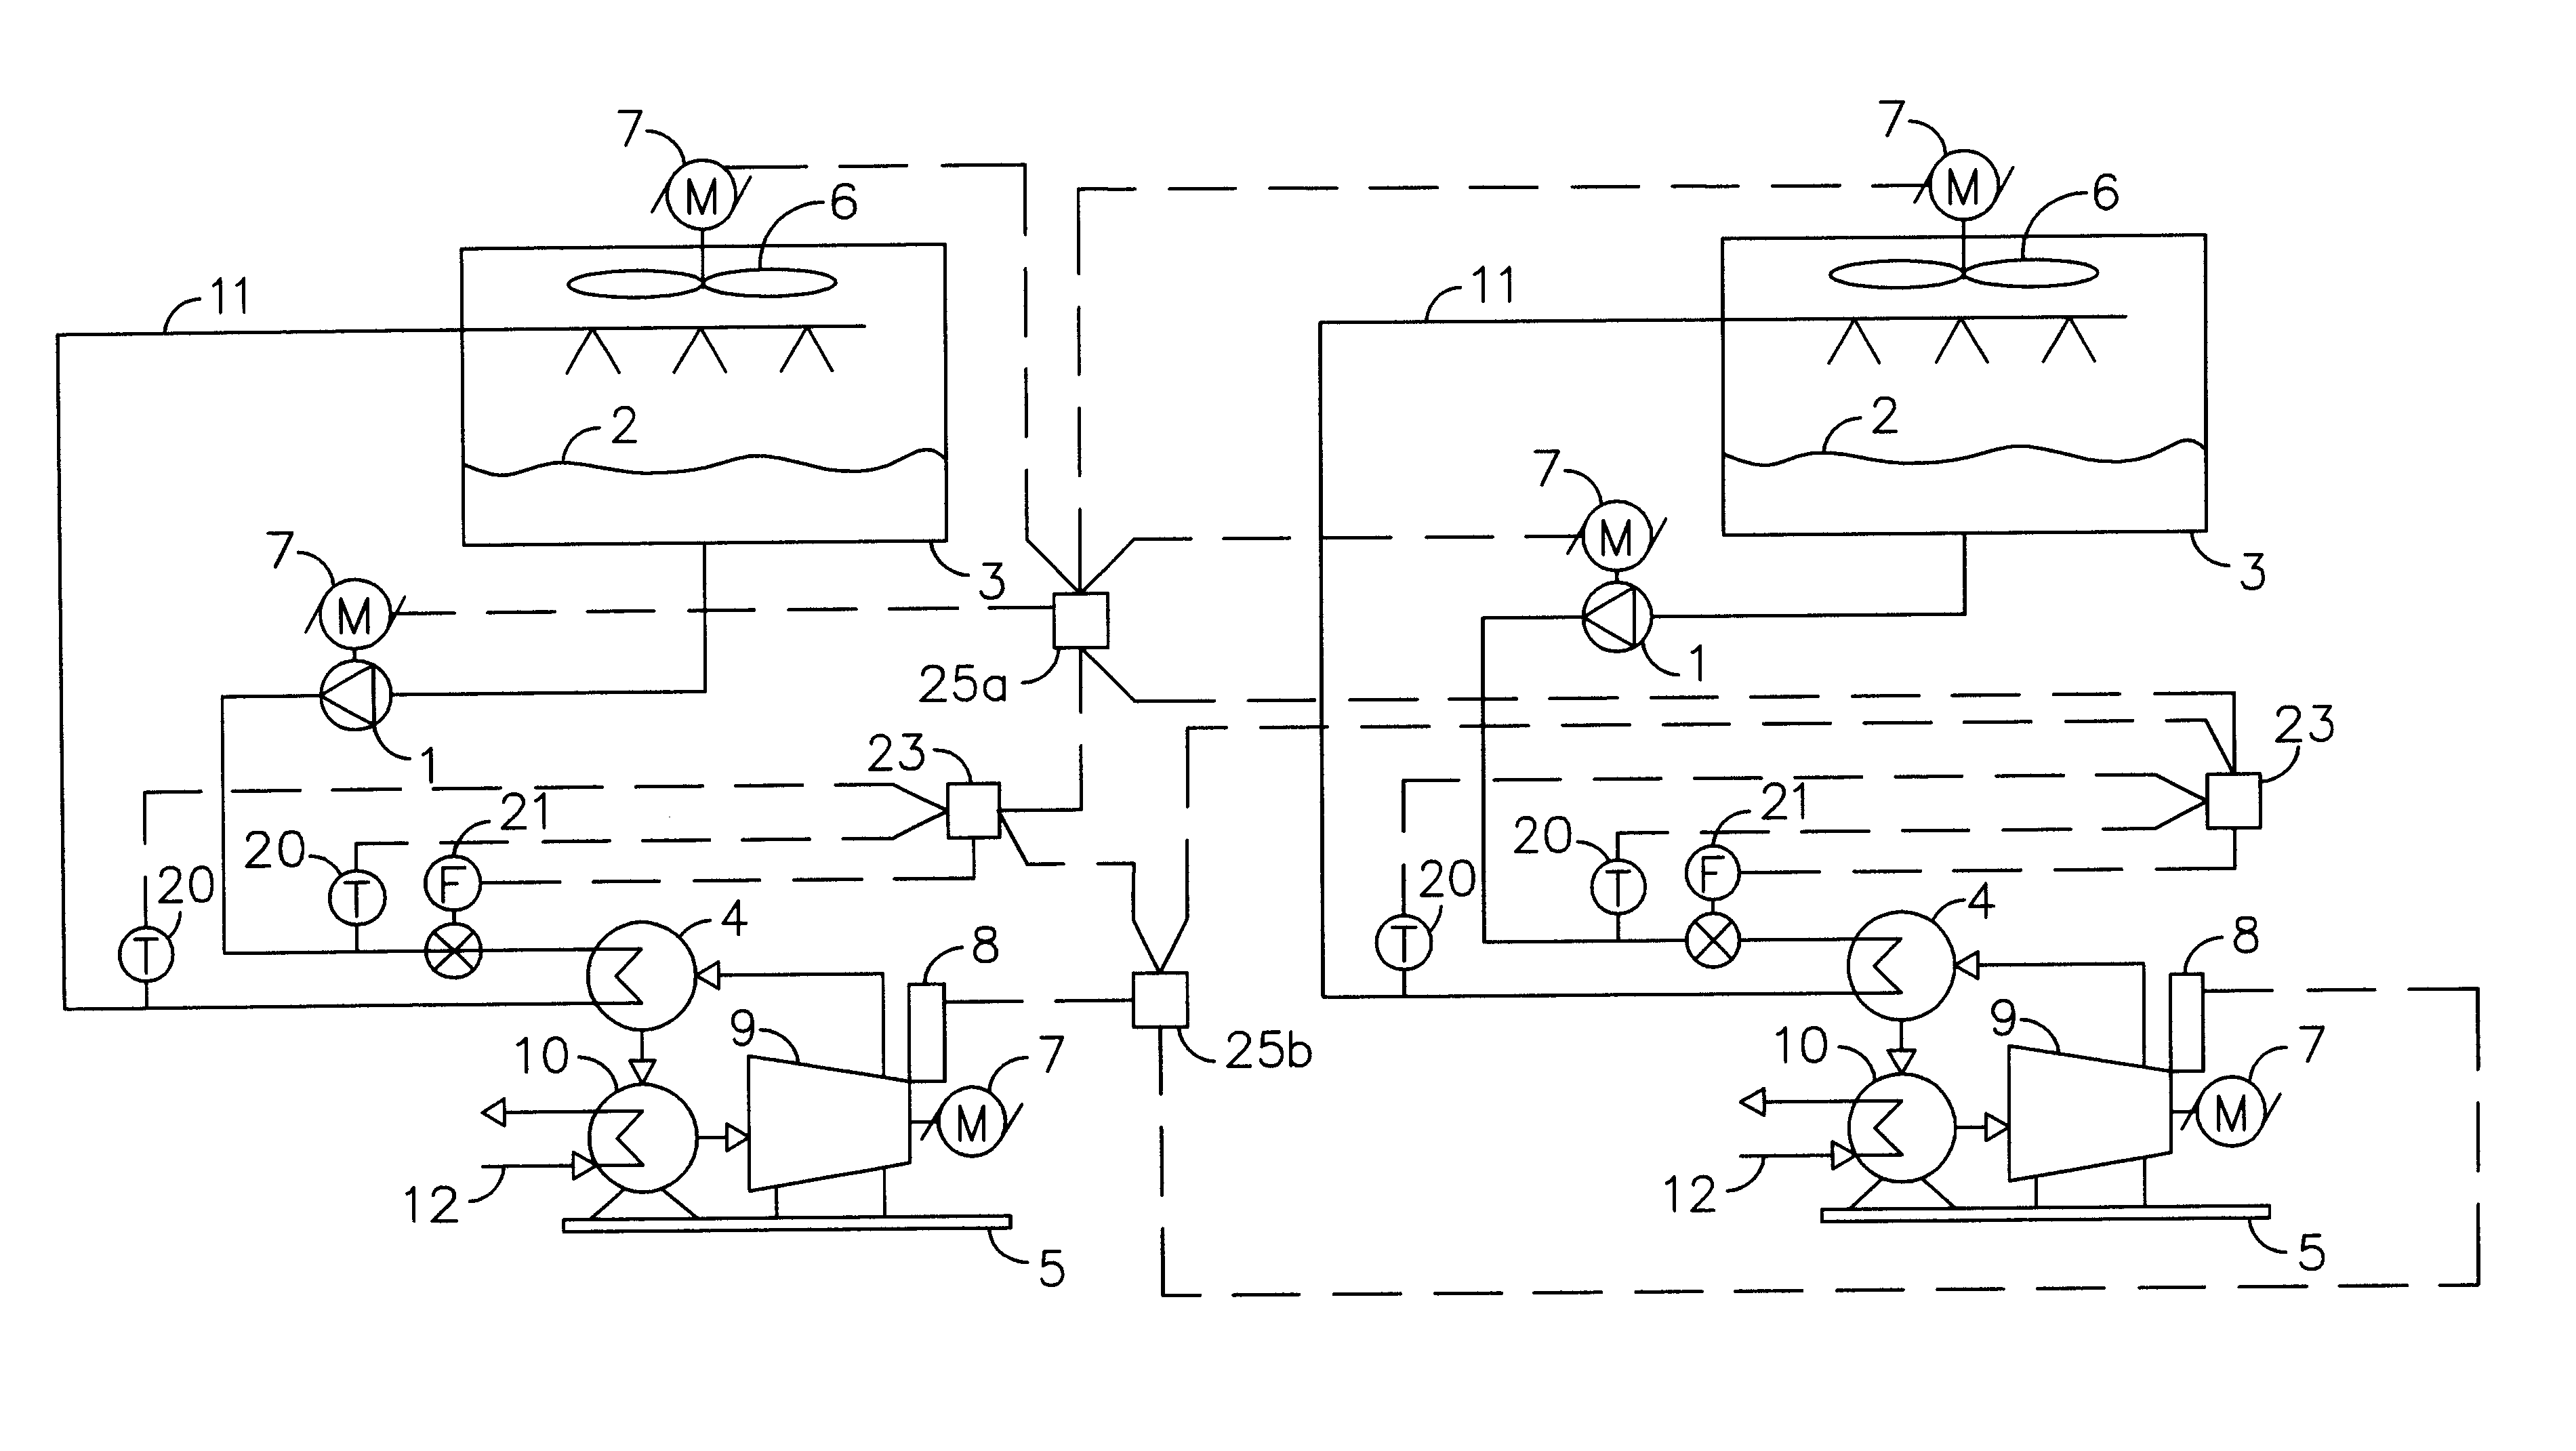 Method to optimize chiller plant operation